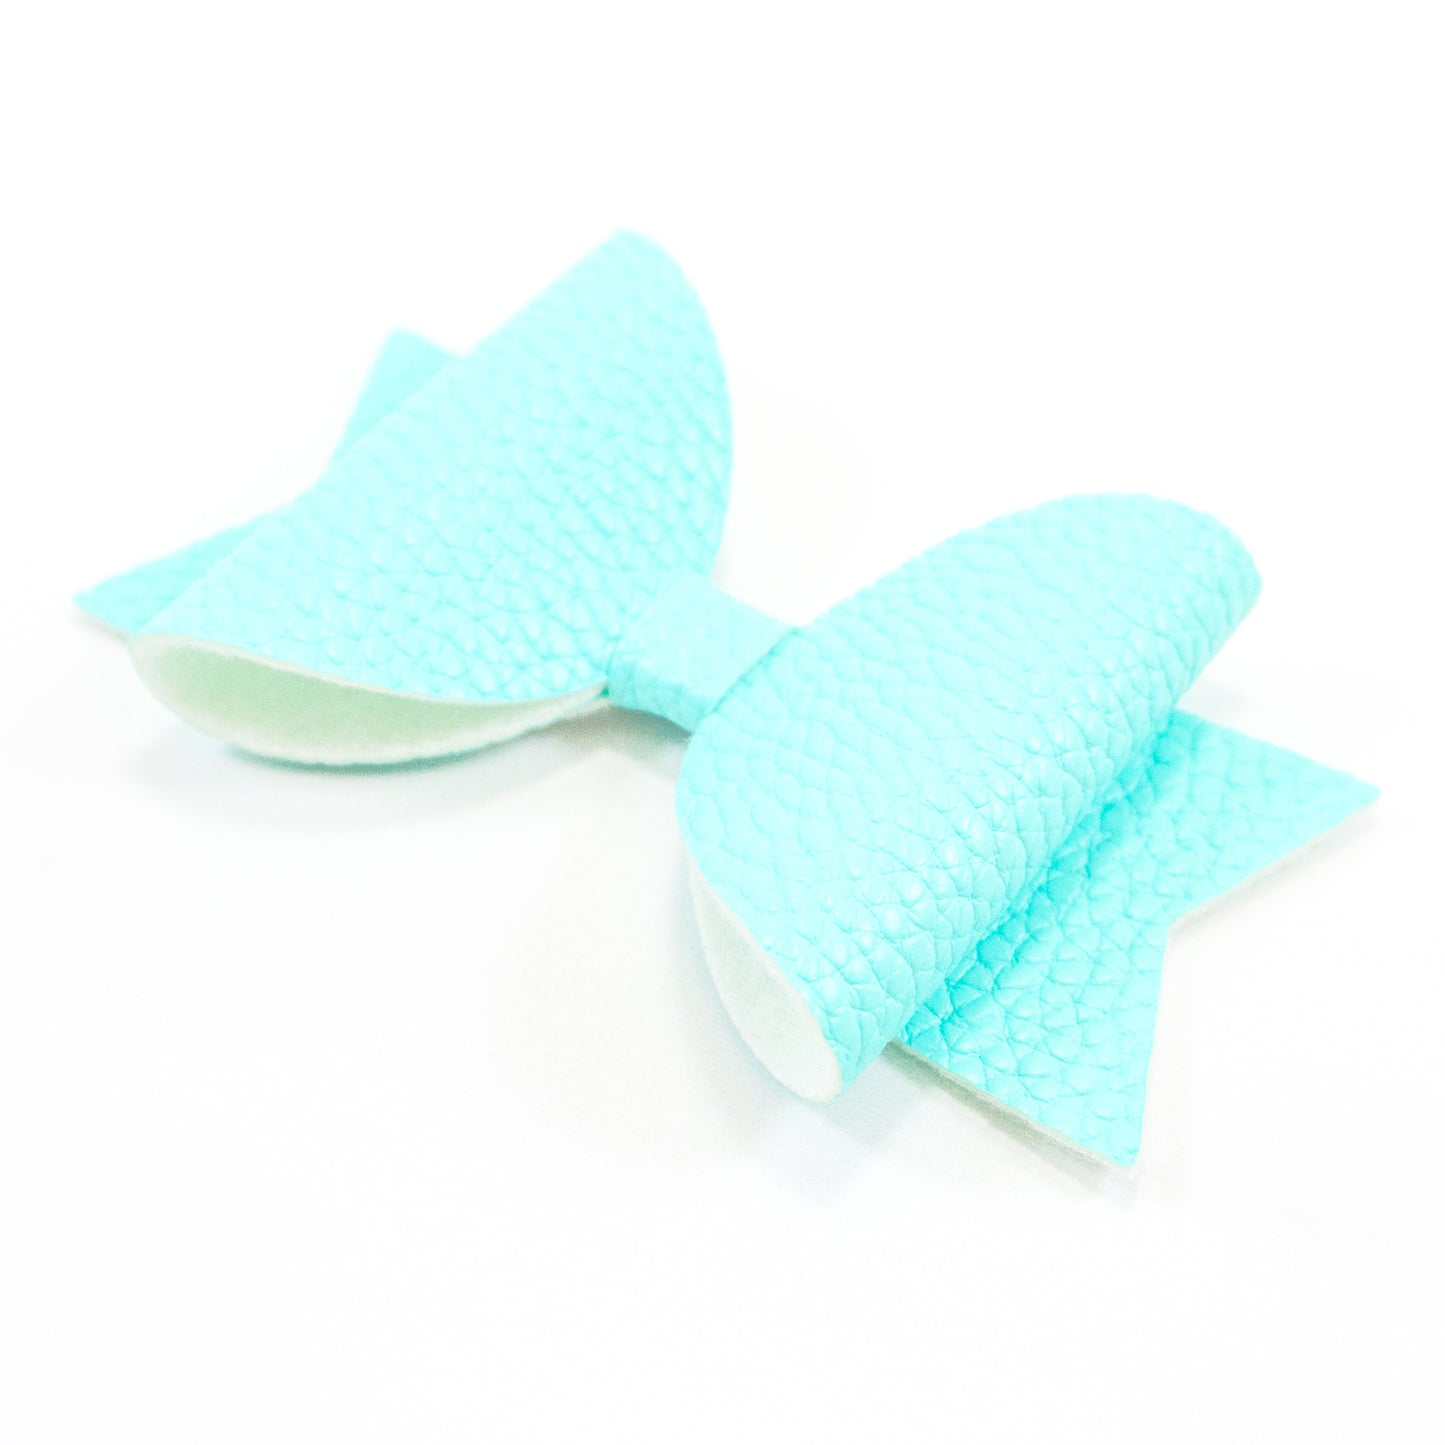 Belle Faux Leather Bow - Textured Minty Tiffany